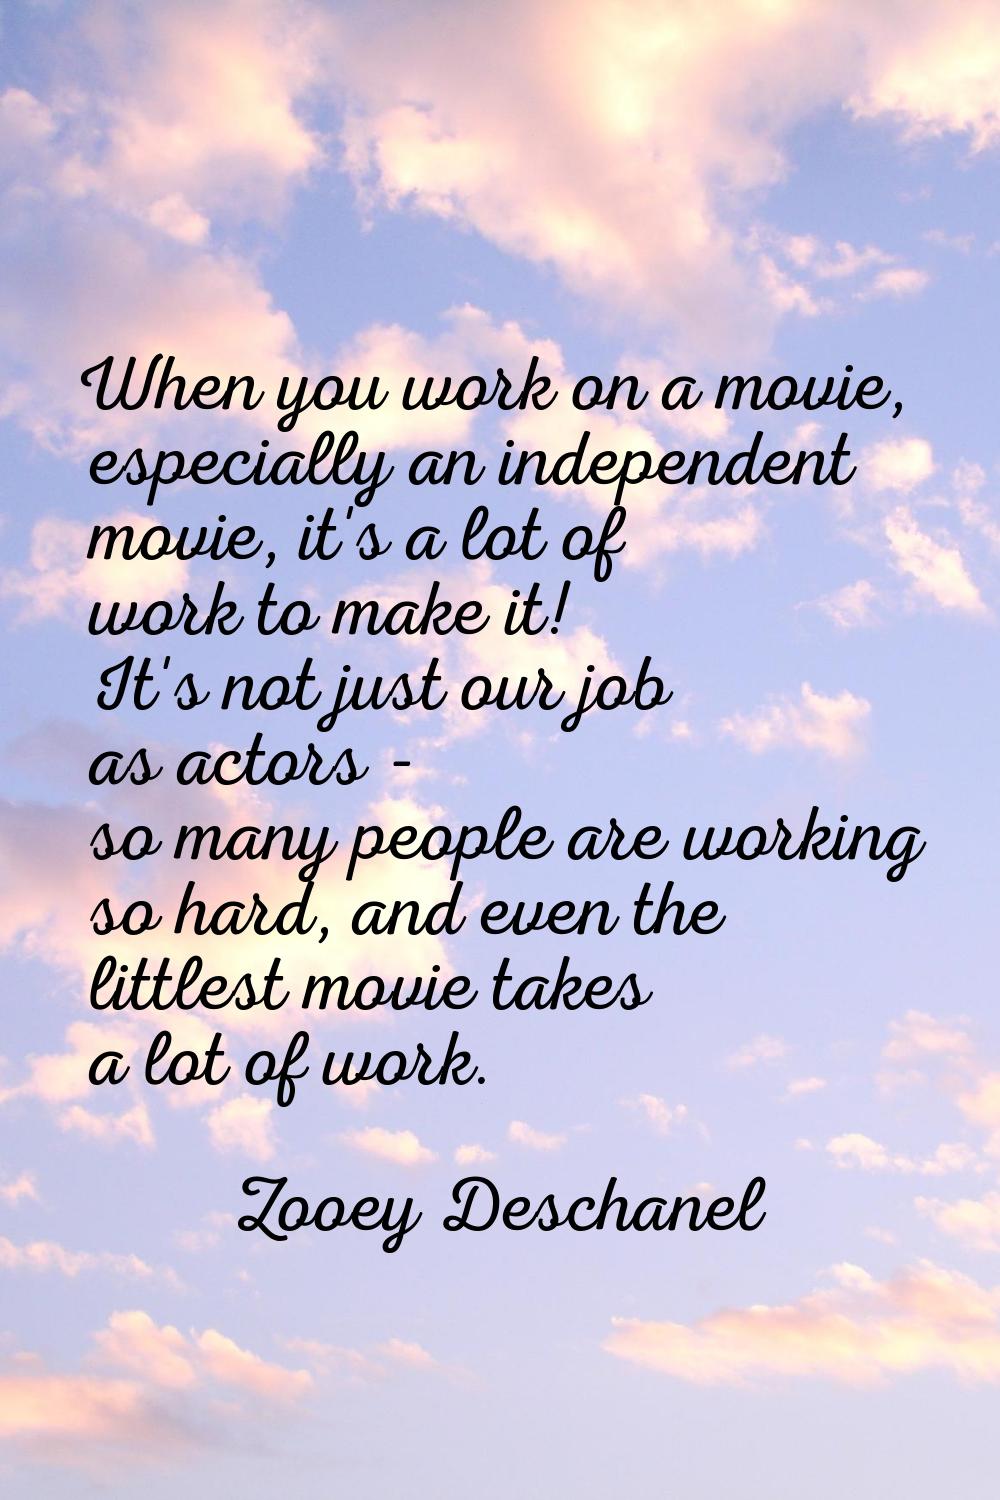 When you work on a movie, especially an independent movie, it's a lot of work to make it! It's not 